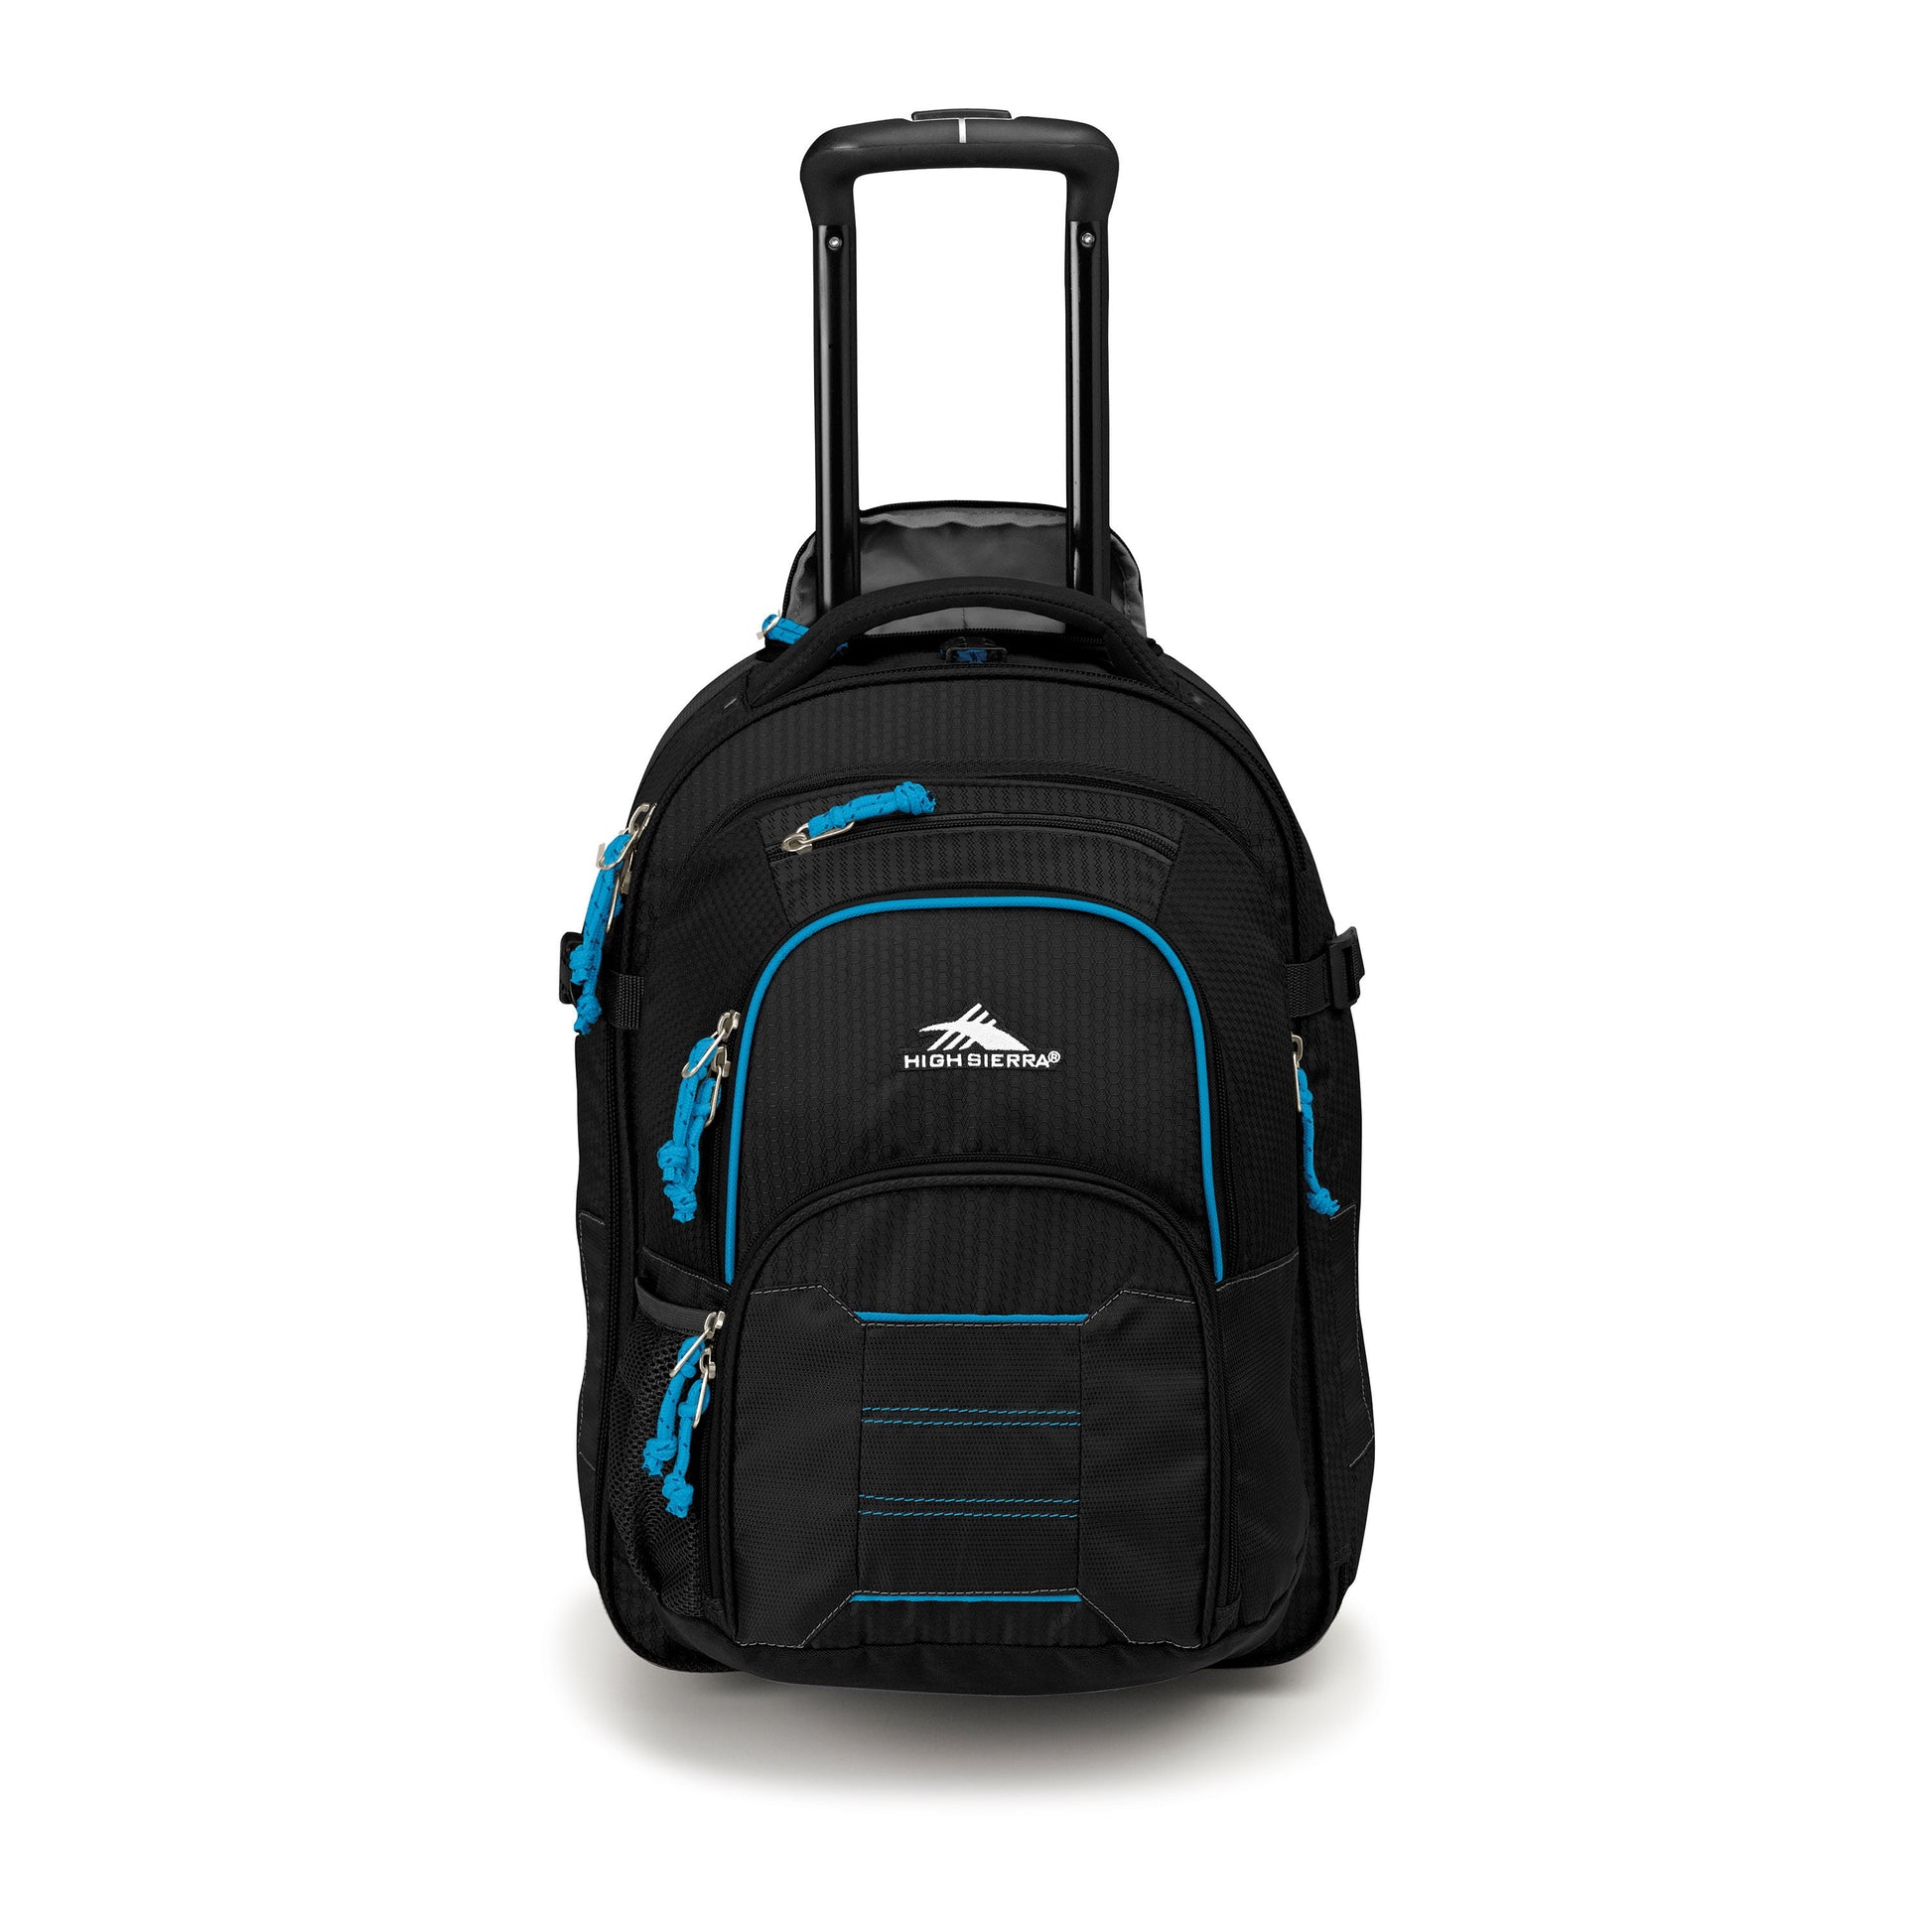 High Sierra Ultimate Access 2.0 Carry-On Wheeled Backpack with Removable Daypack - Black/Blue Print